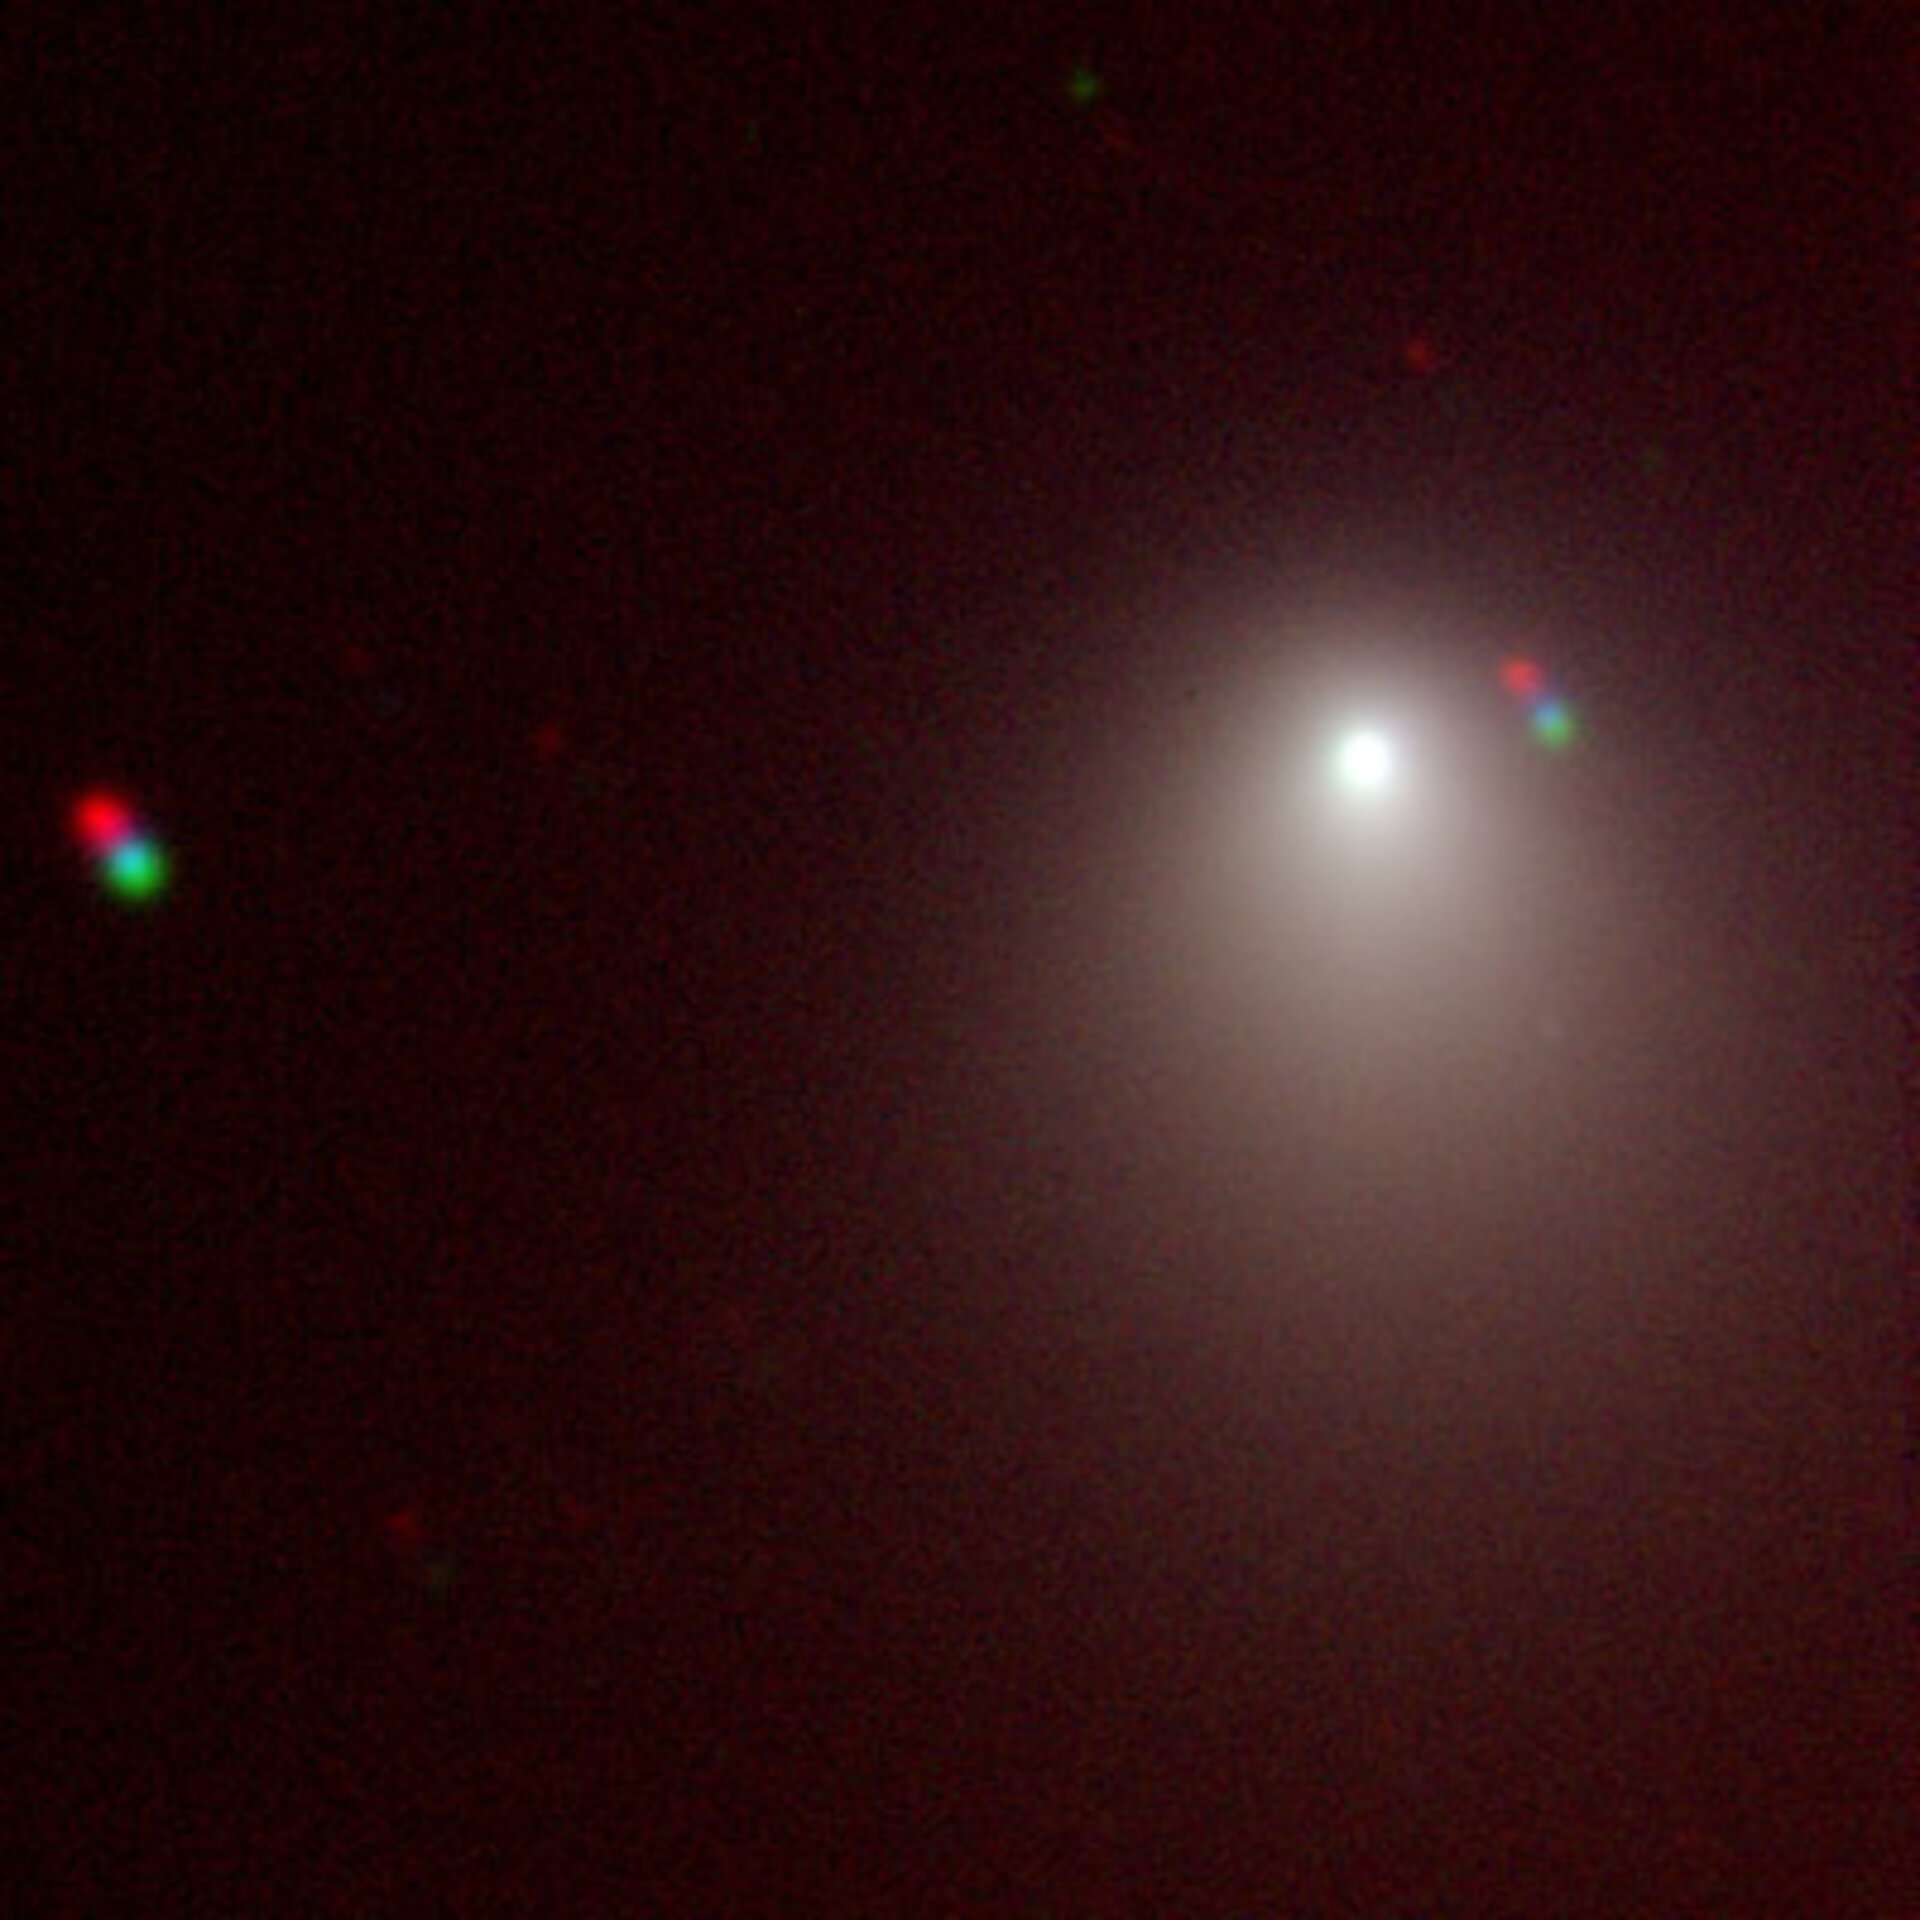 Comet 9P/Tempel 1 as seen by ESO telescope